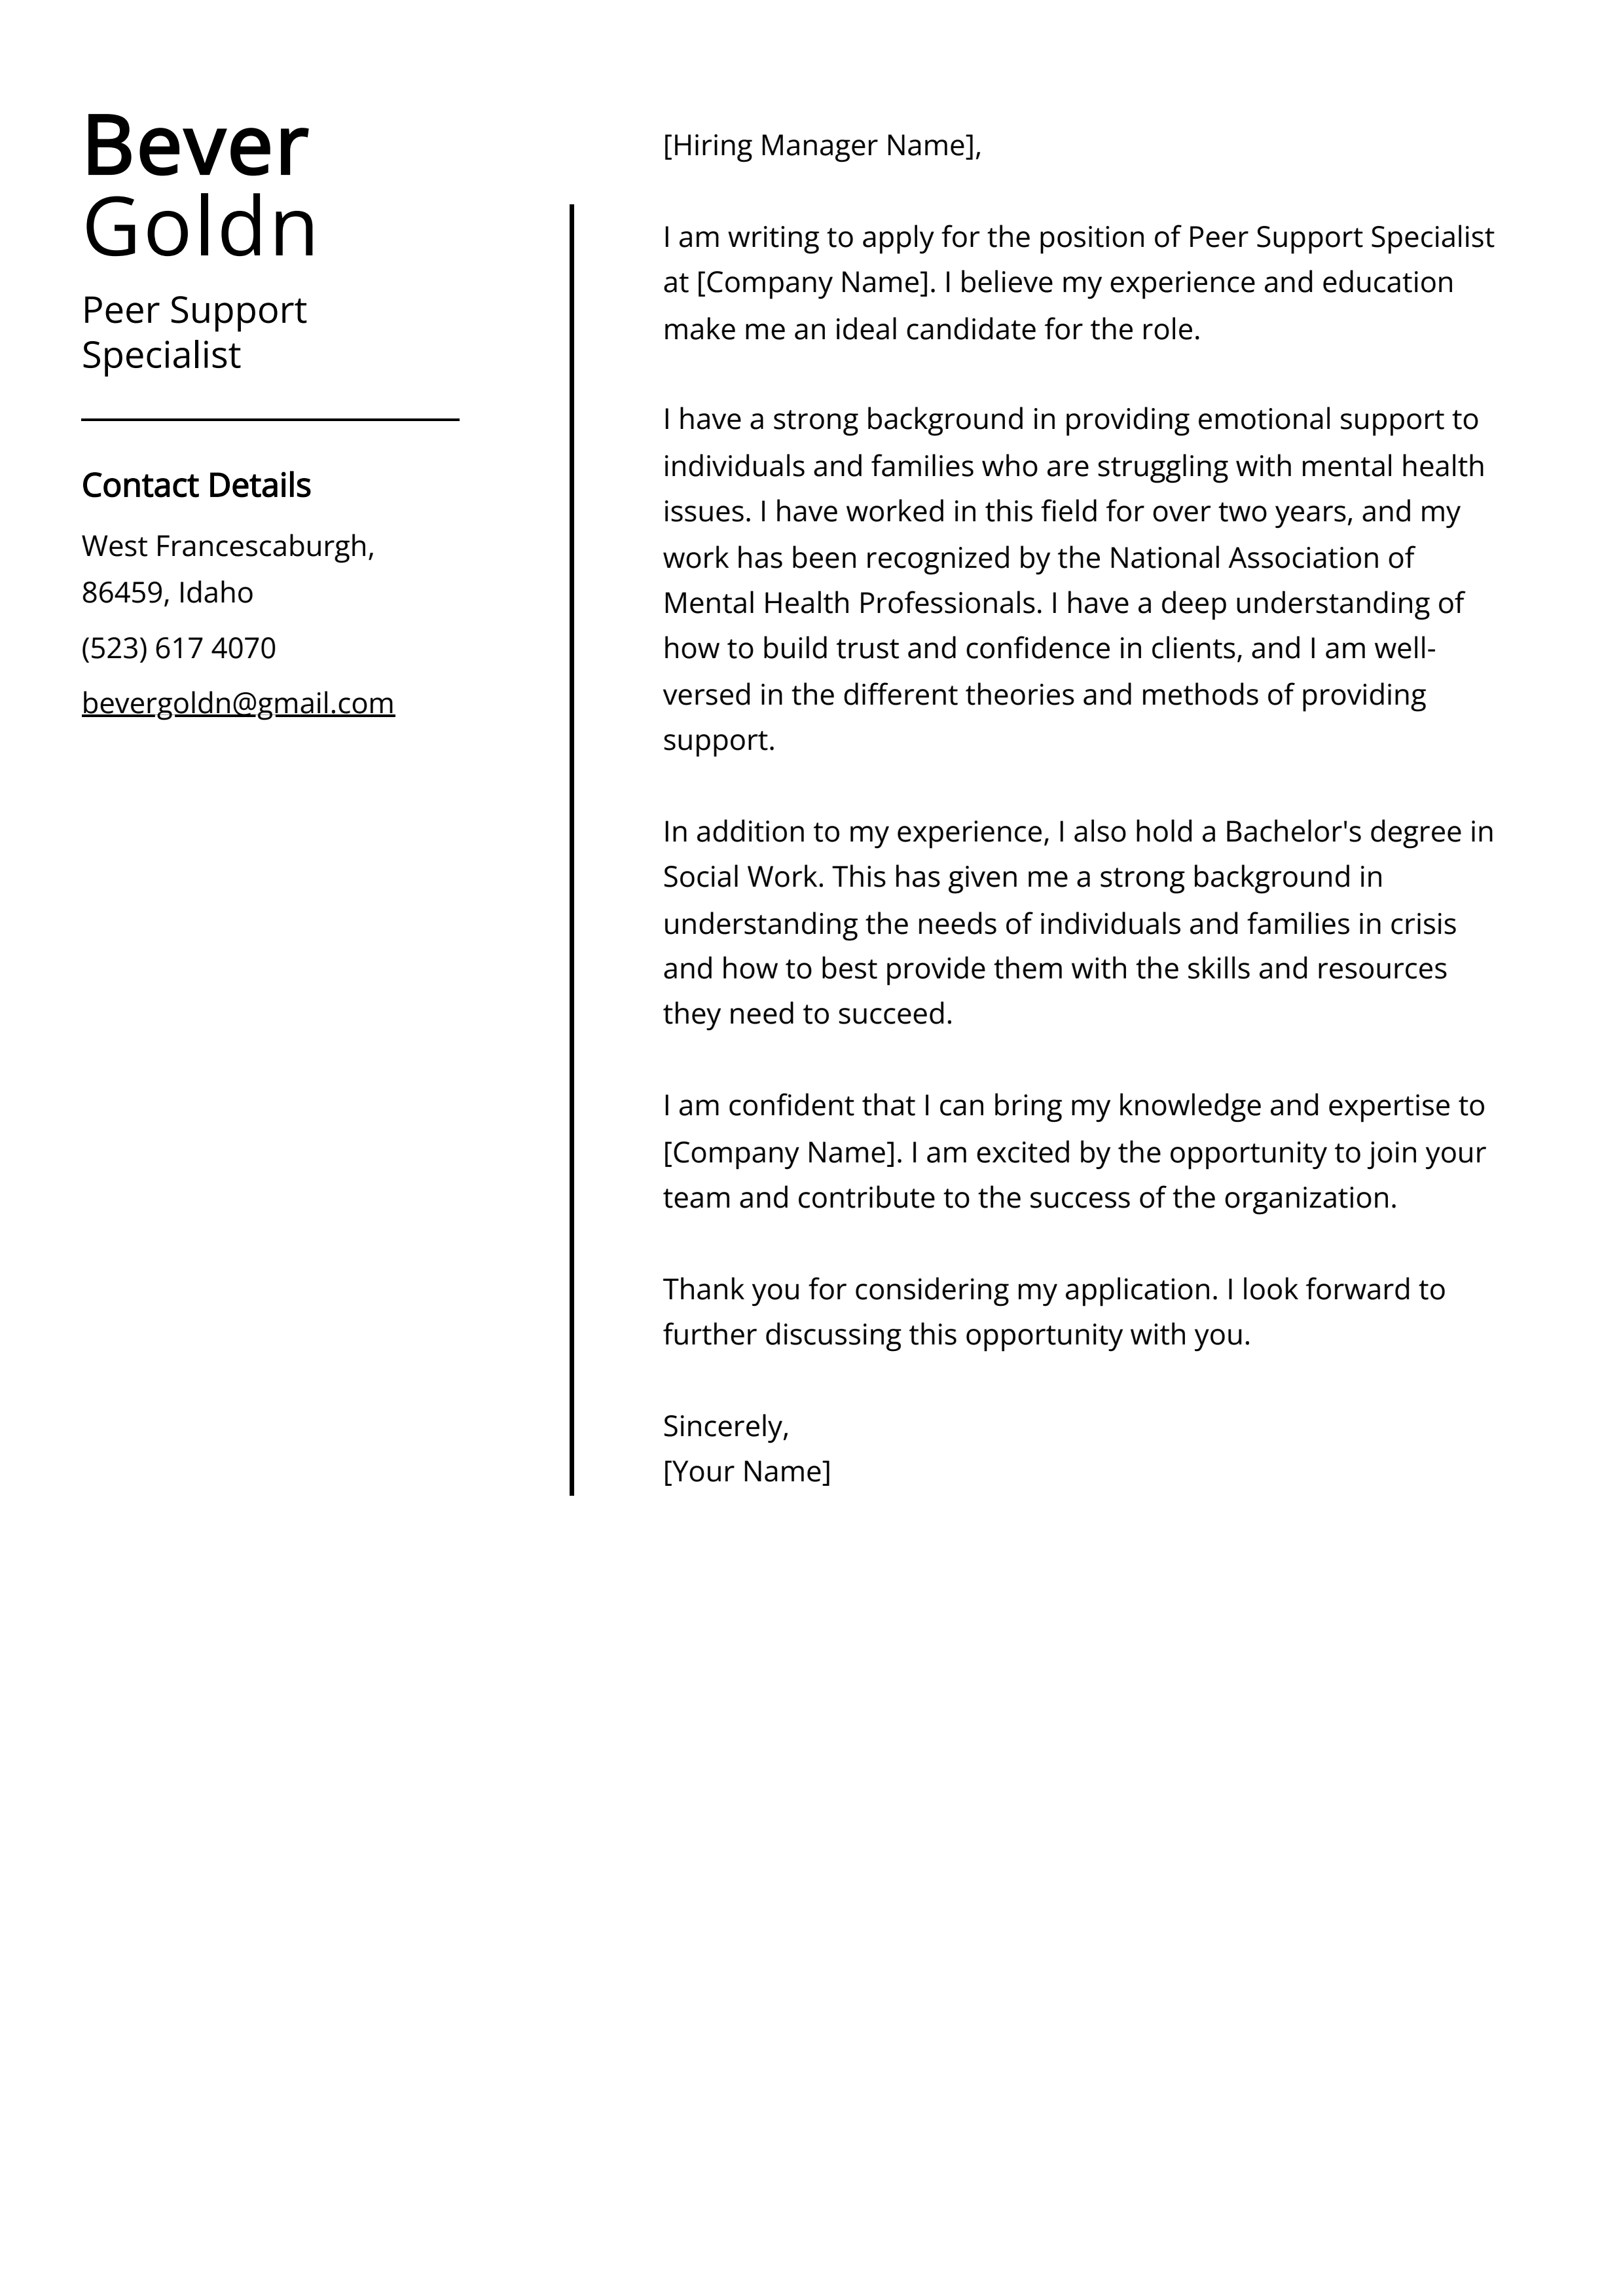 Peer Support Specialist Cover Letter Example